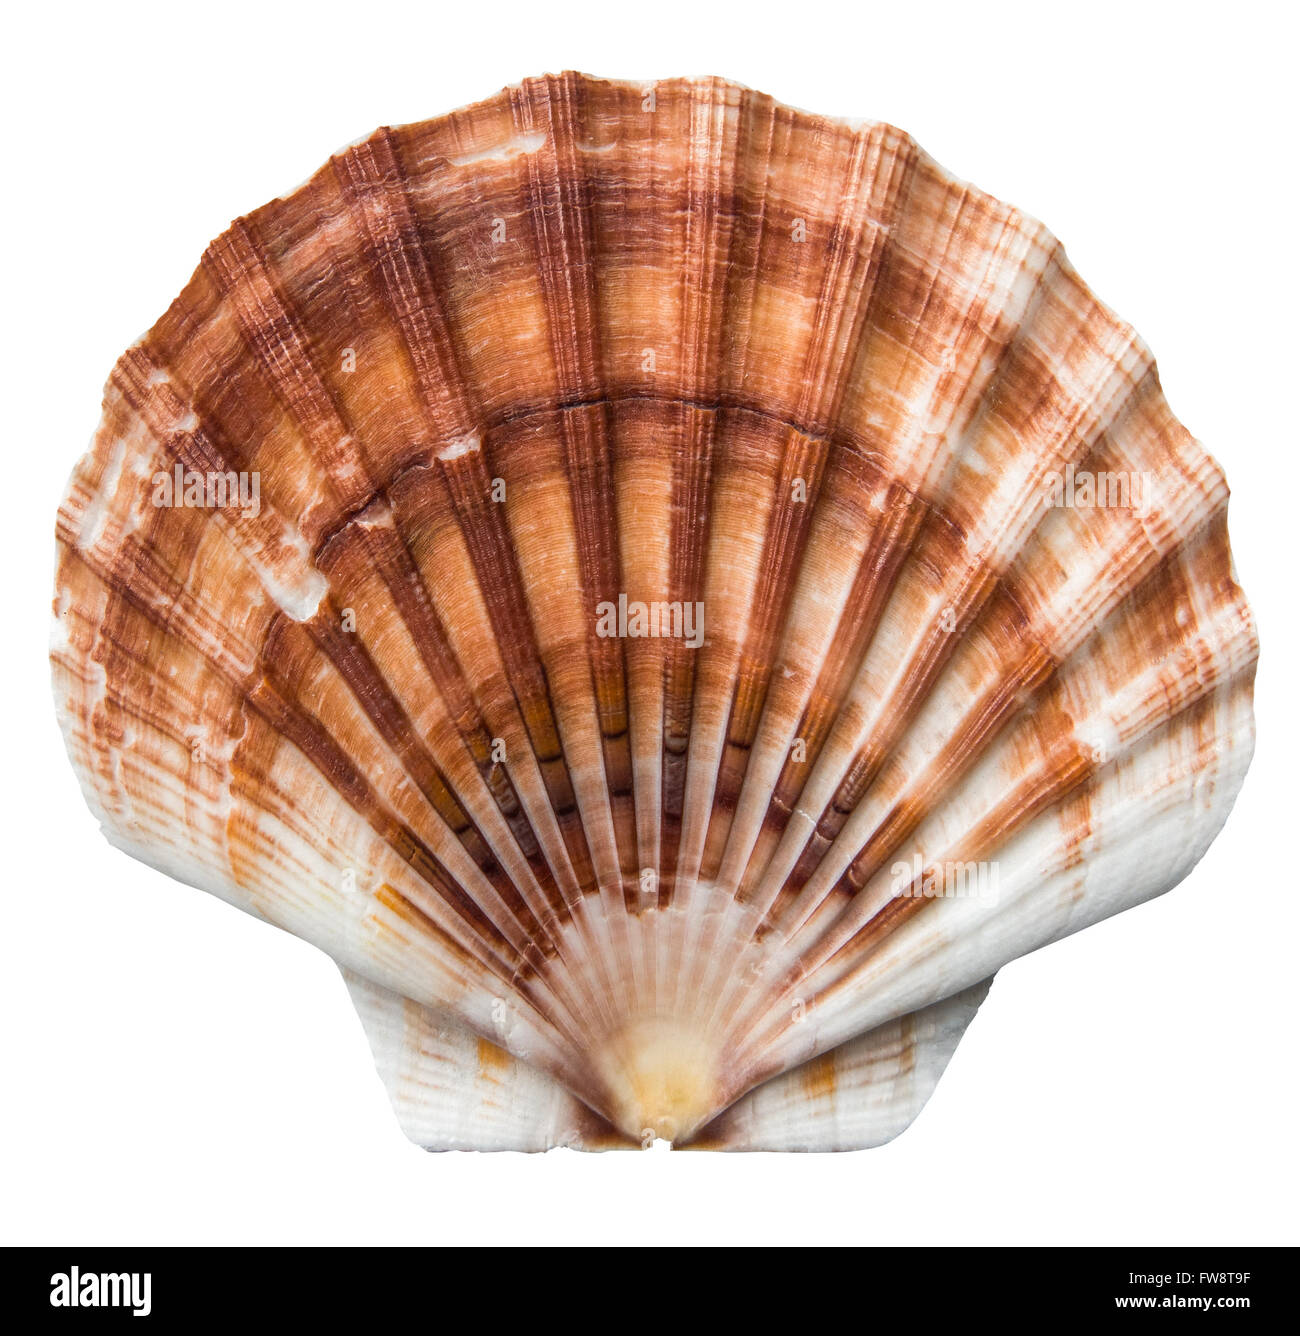 Brown And White Scallops Shell On A White Background Stock Photo